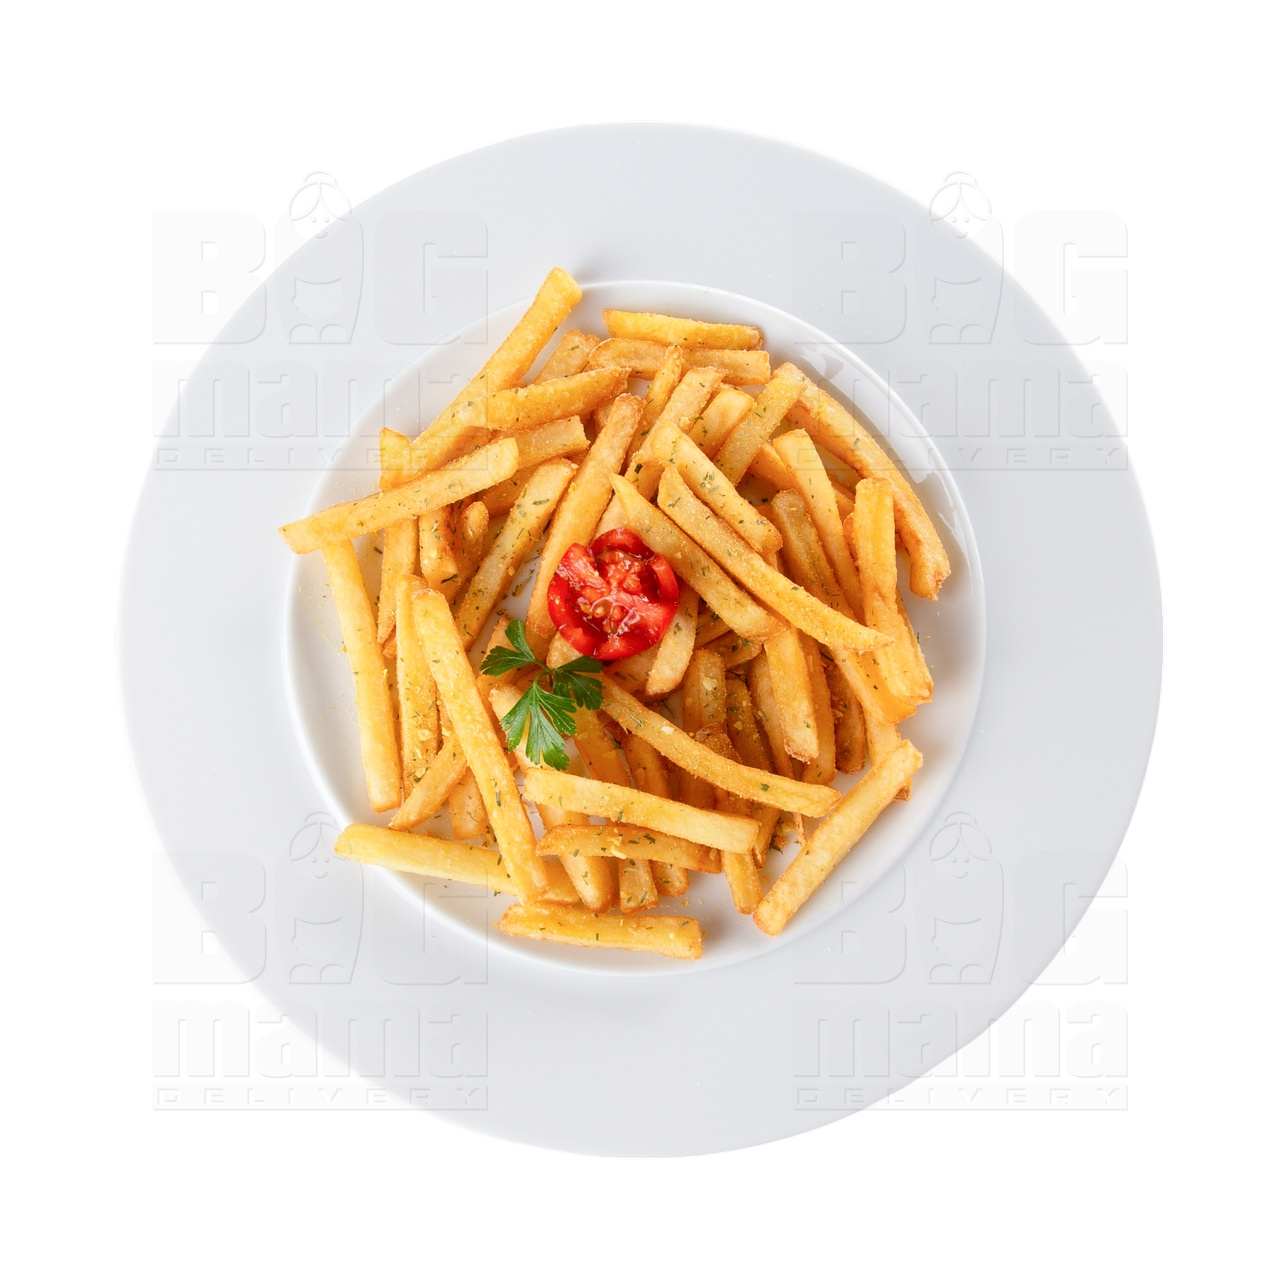 Product #268 image - French fries with spices